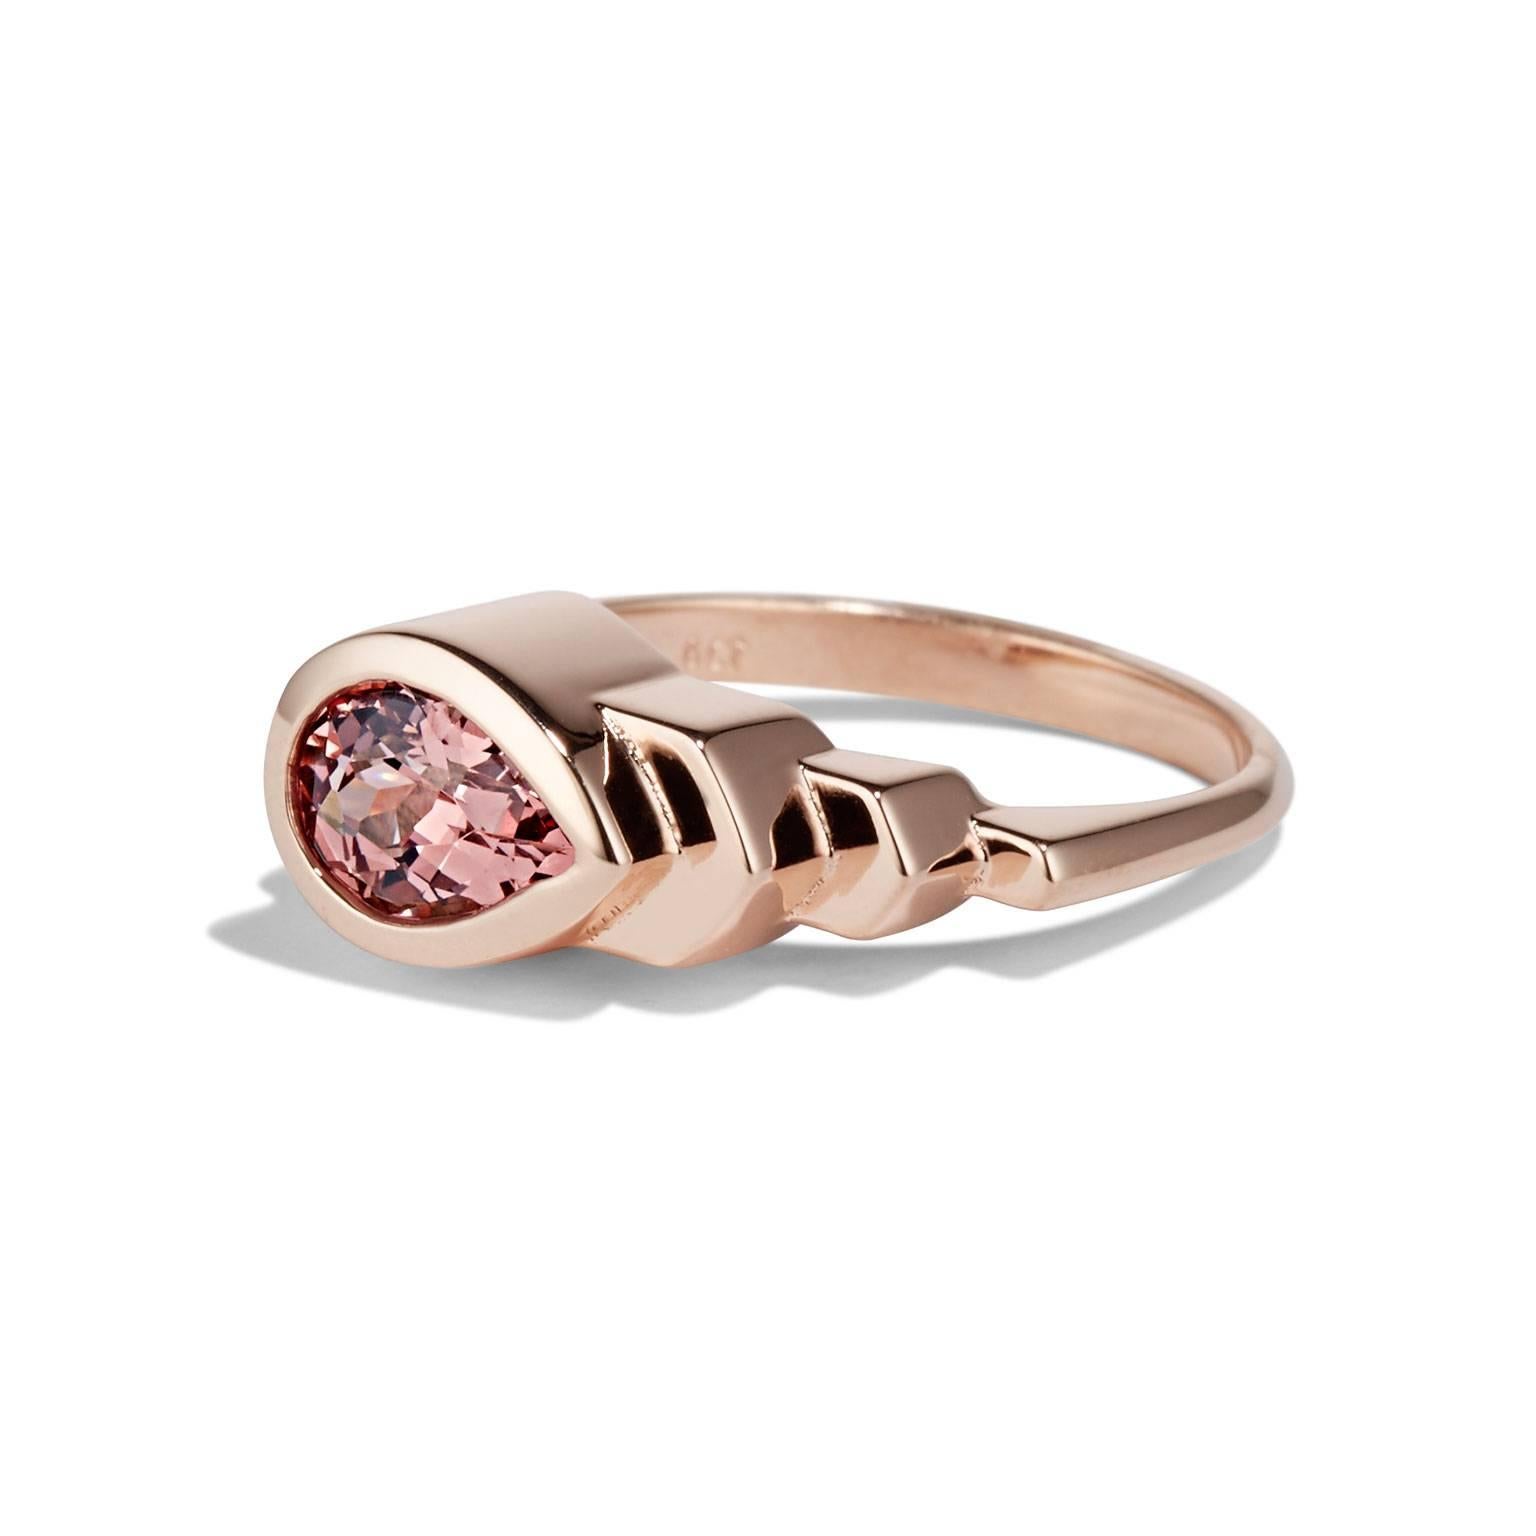 Bold and architectural in form, soft and feminine in materials, the Skyline ring from Cushla Whiting's 1920s inspired Metropolis collection, features a distinctive peach spinel.

The SKYLINE ring is made in 18 carat rose gold holding a 0.85 carat